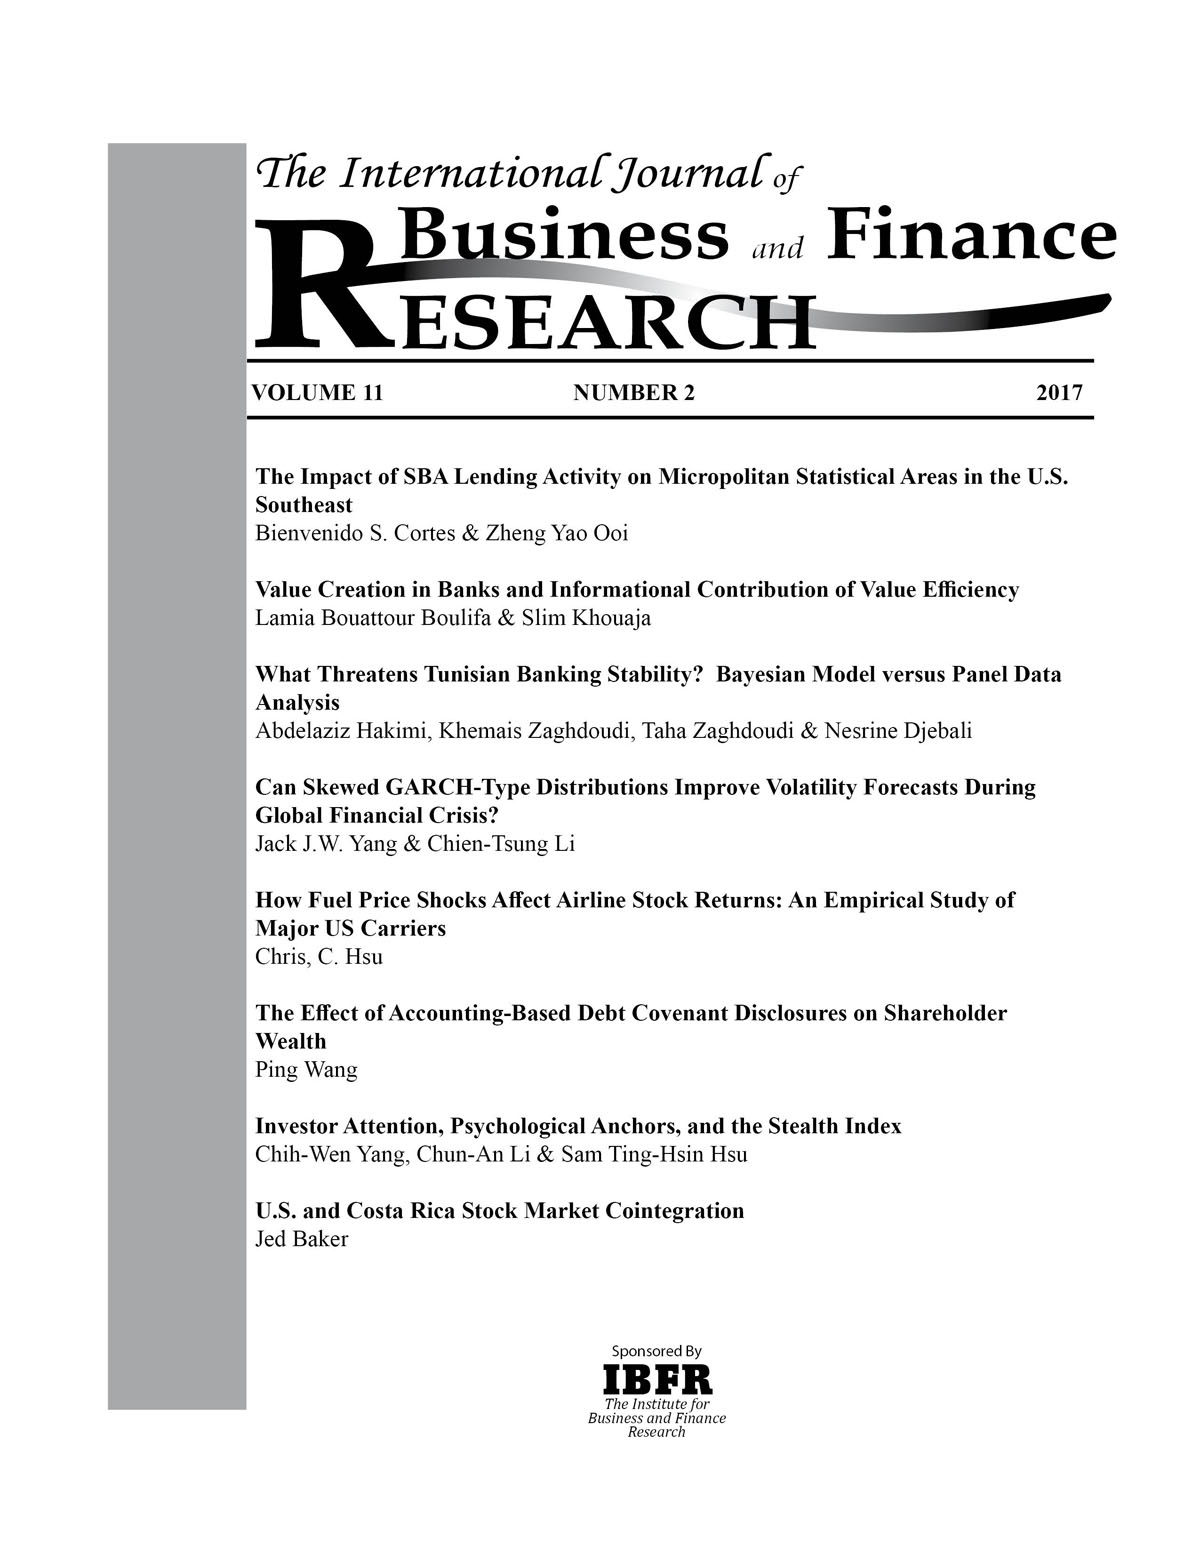 research articles on finance